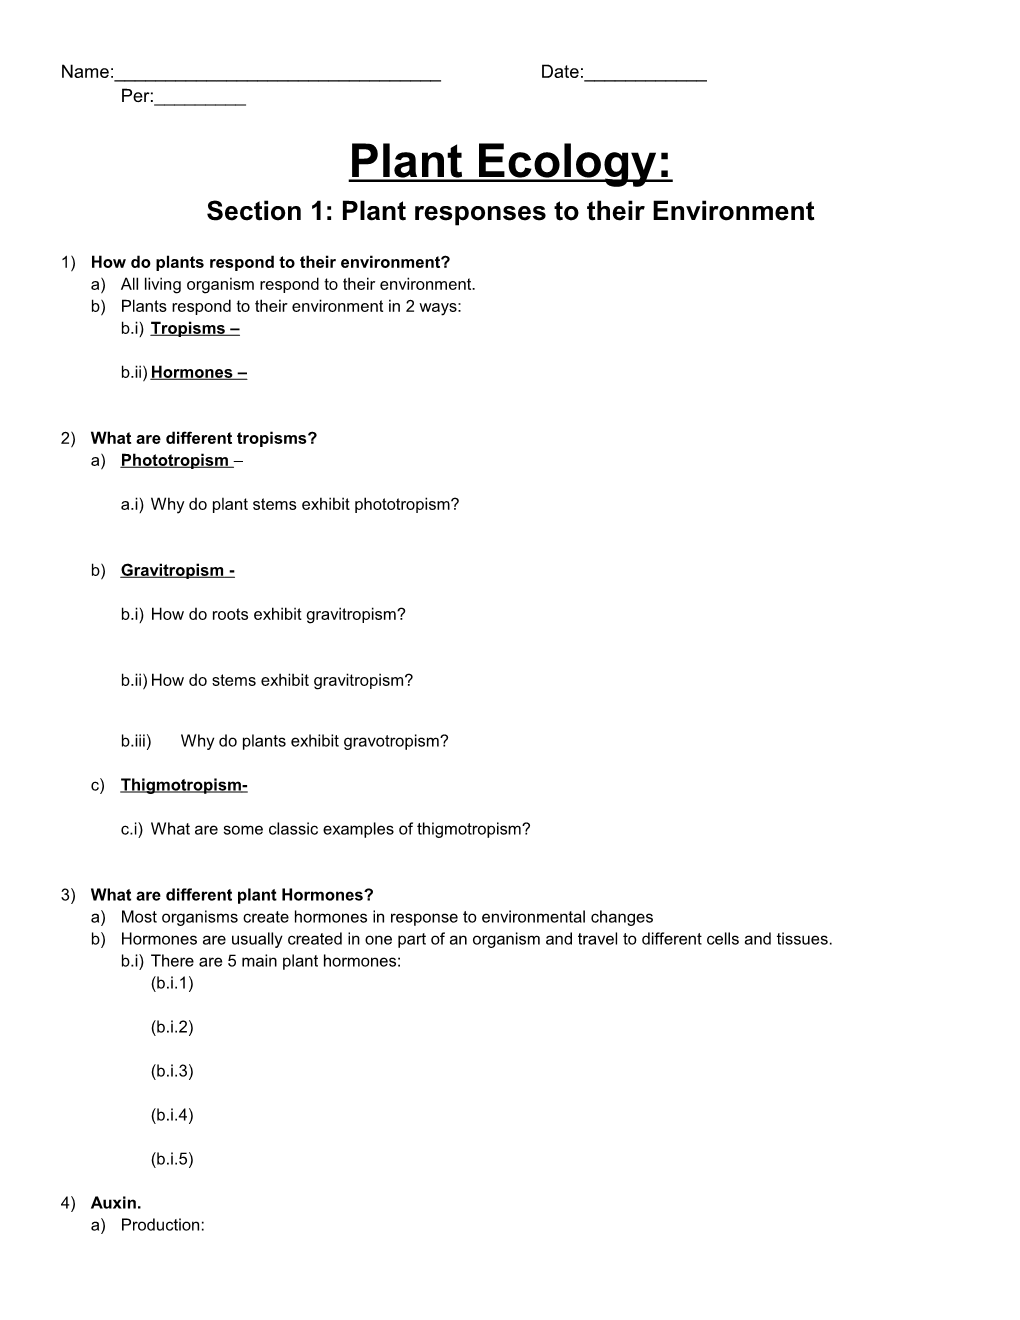 Section 1: Plant Responses to Their Environment